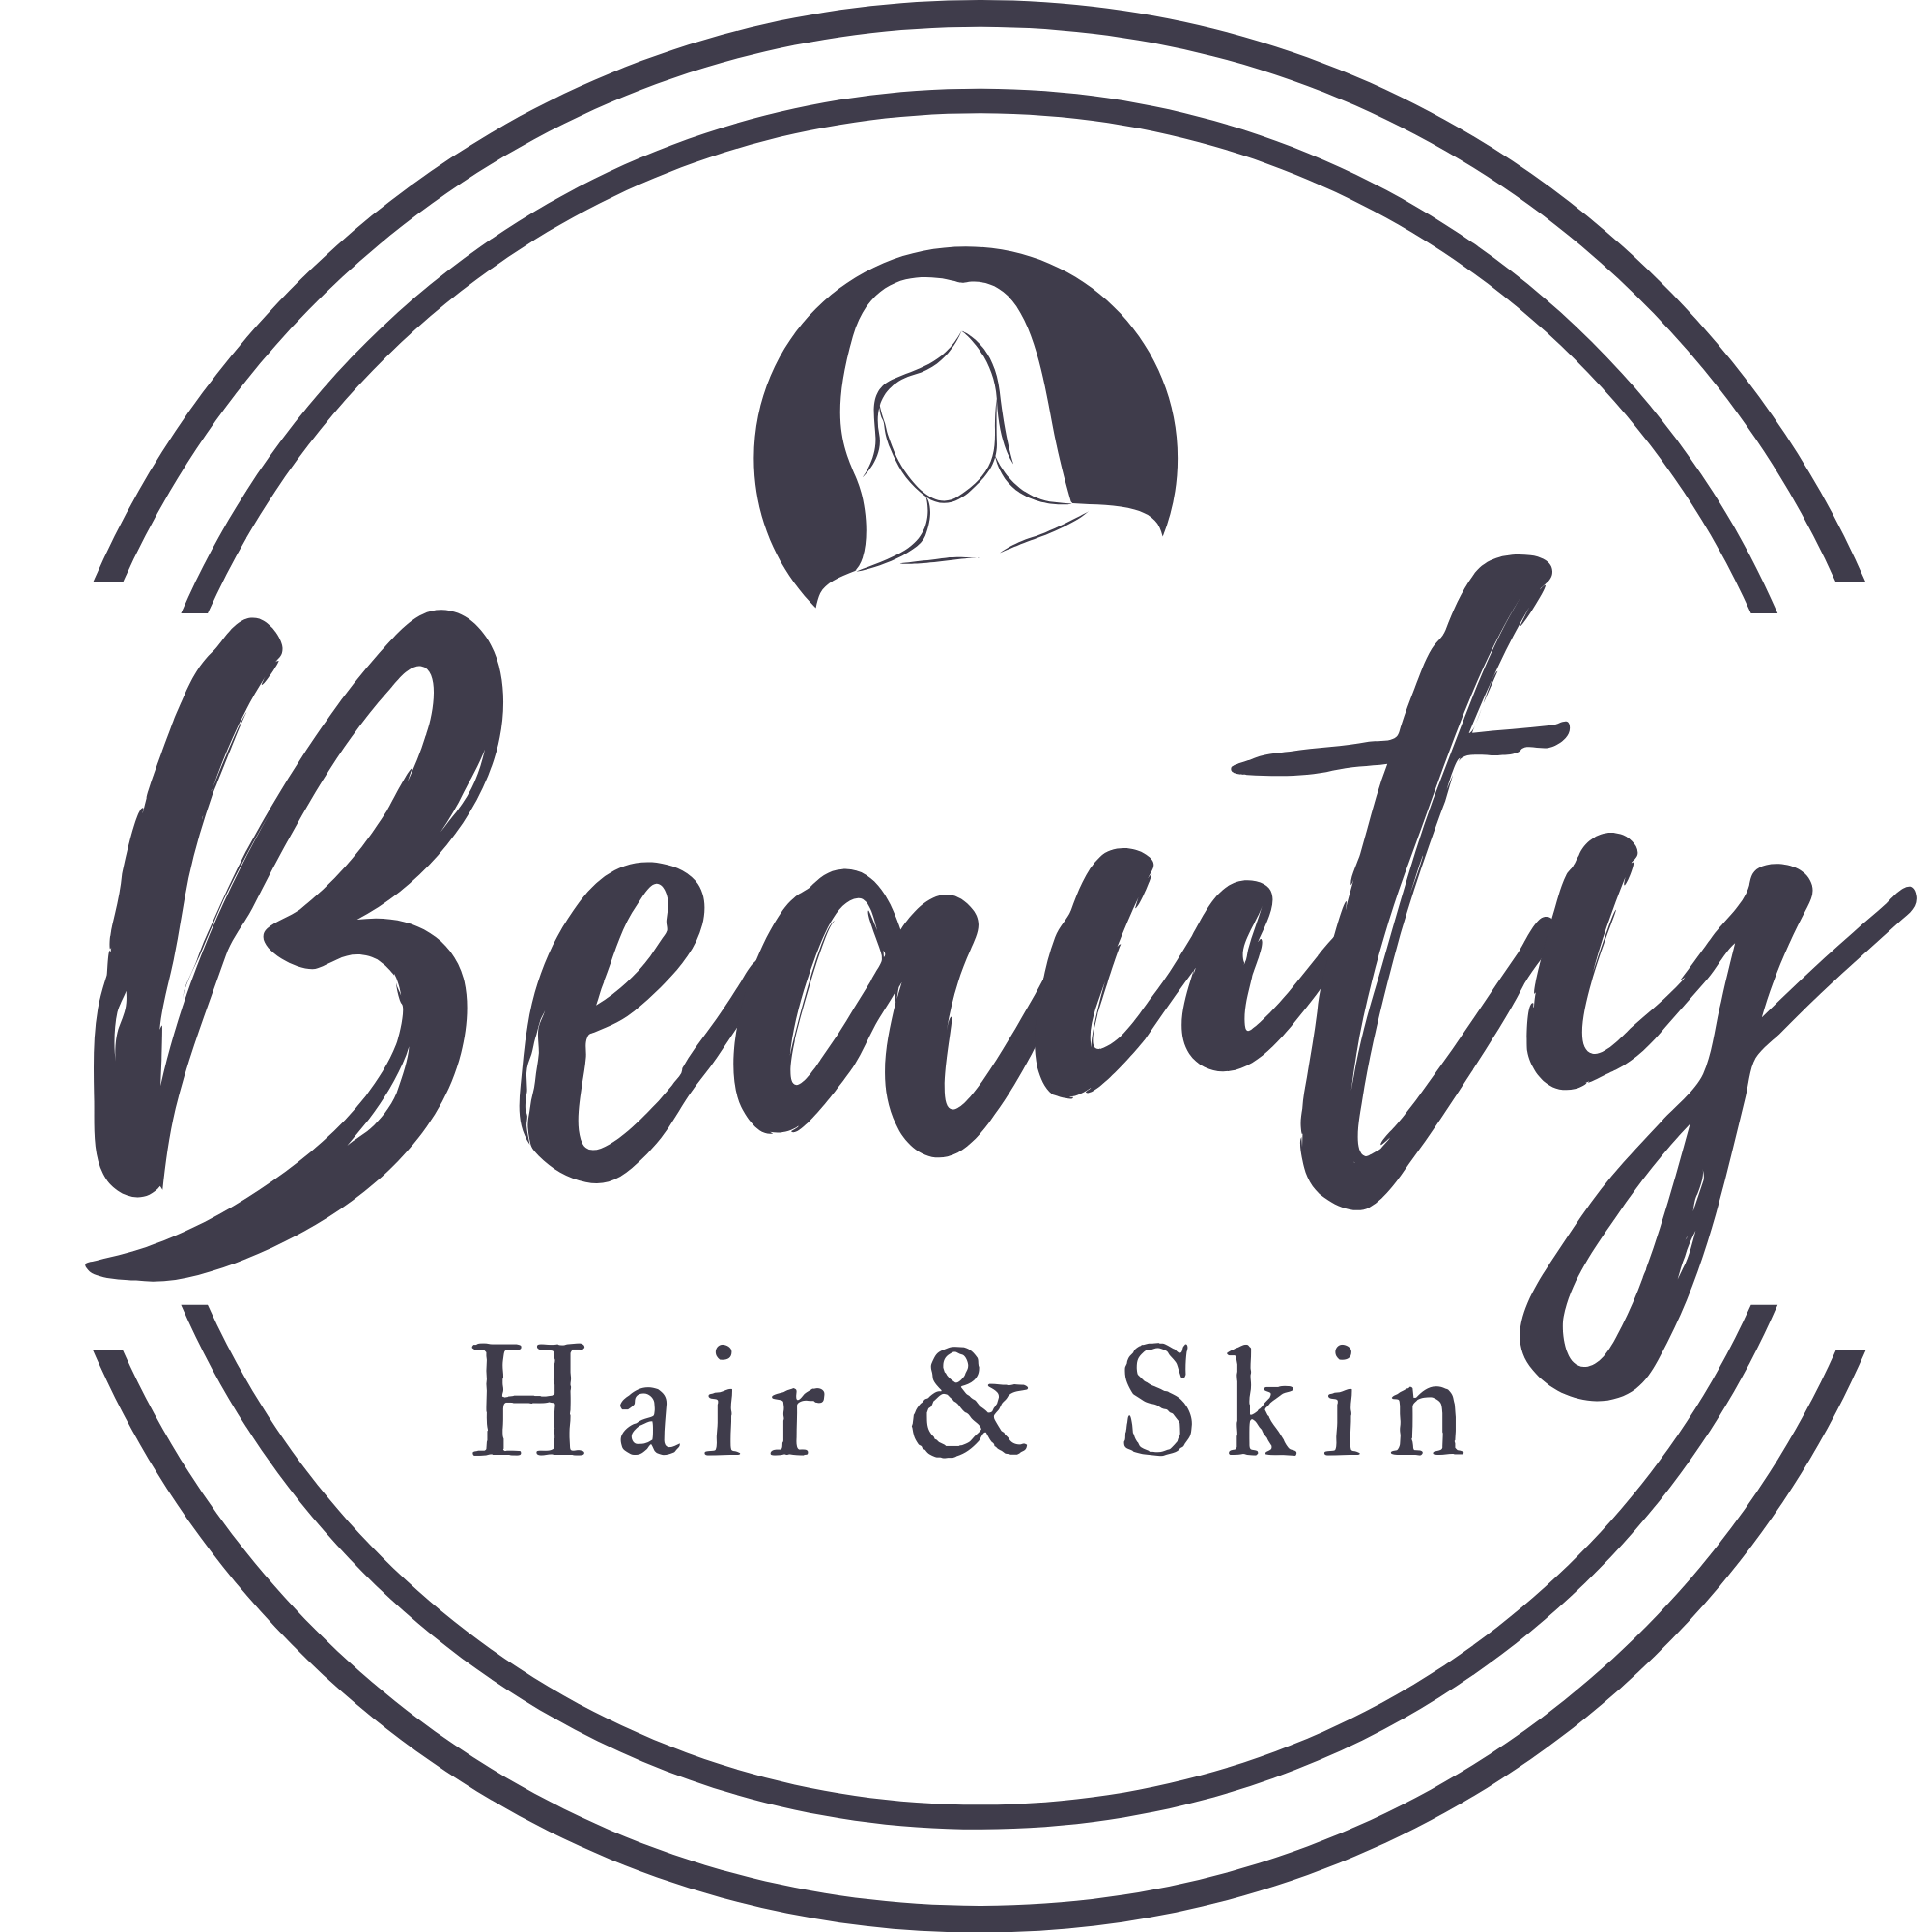 BEAUTY HAIR AND SKIN